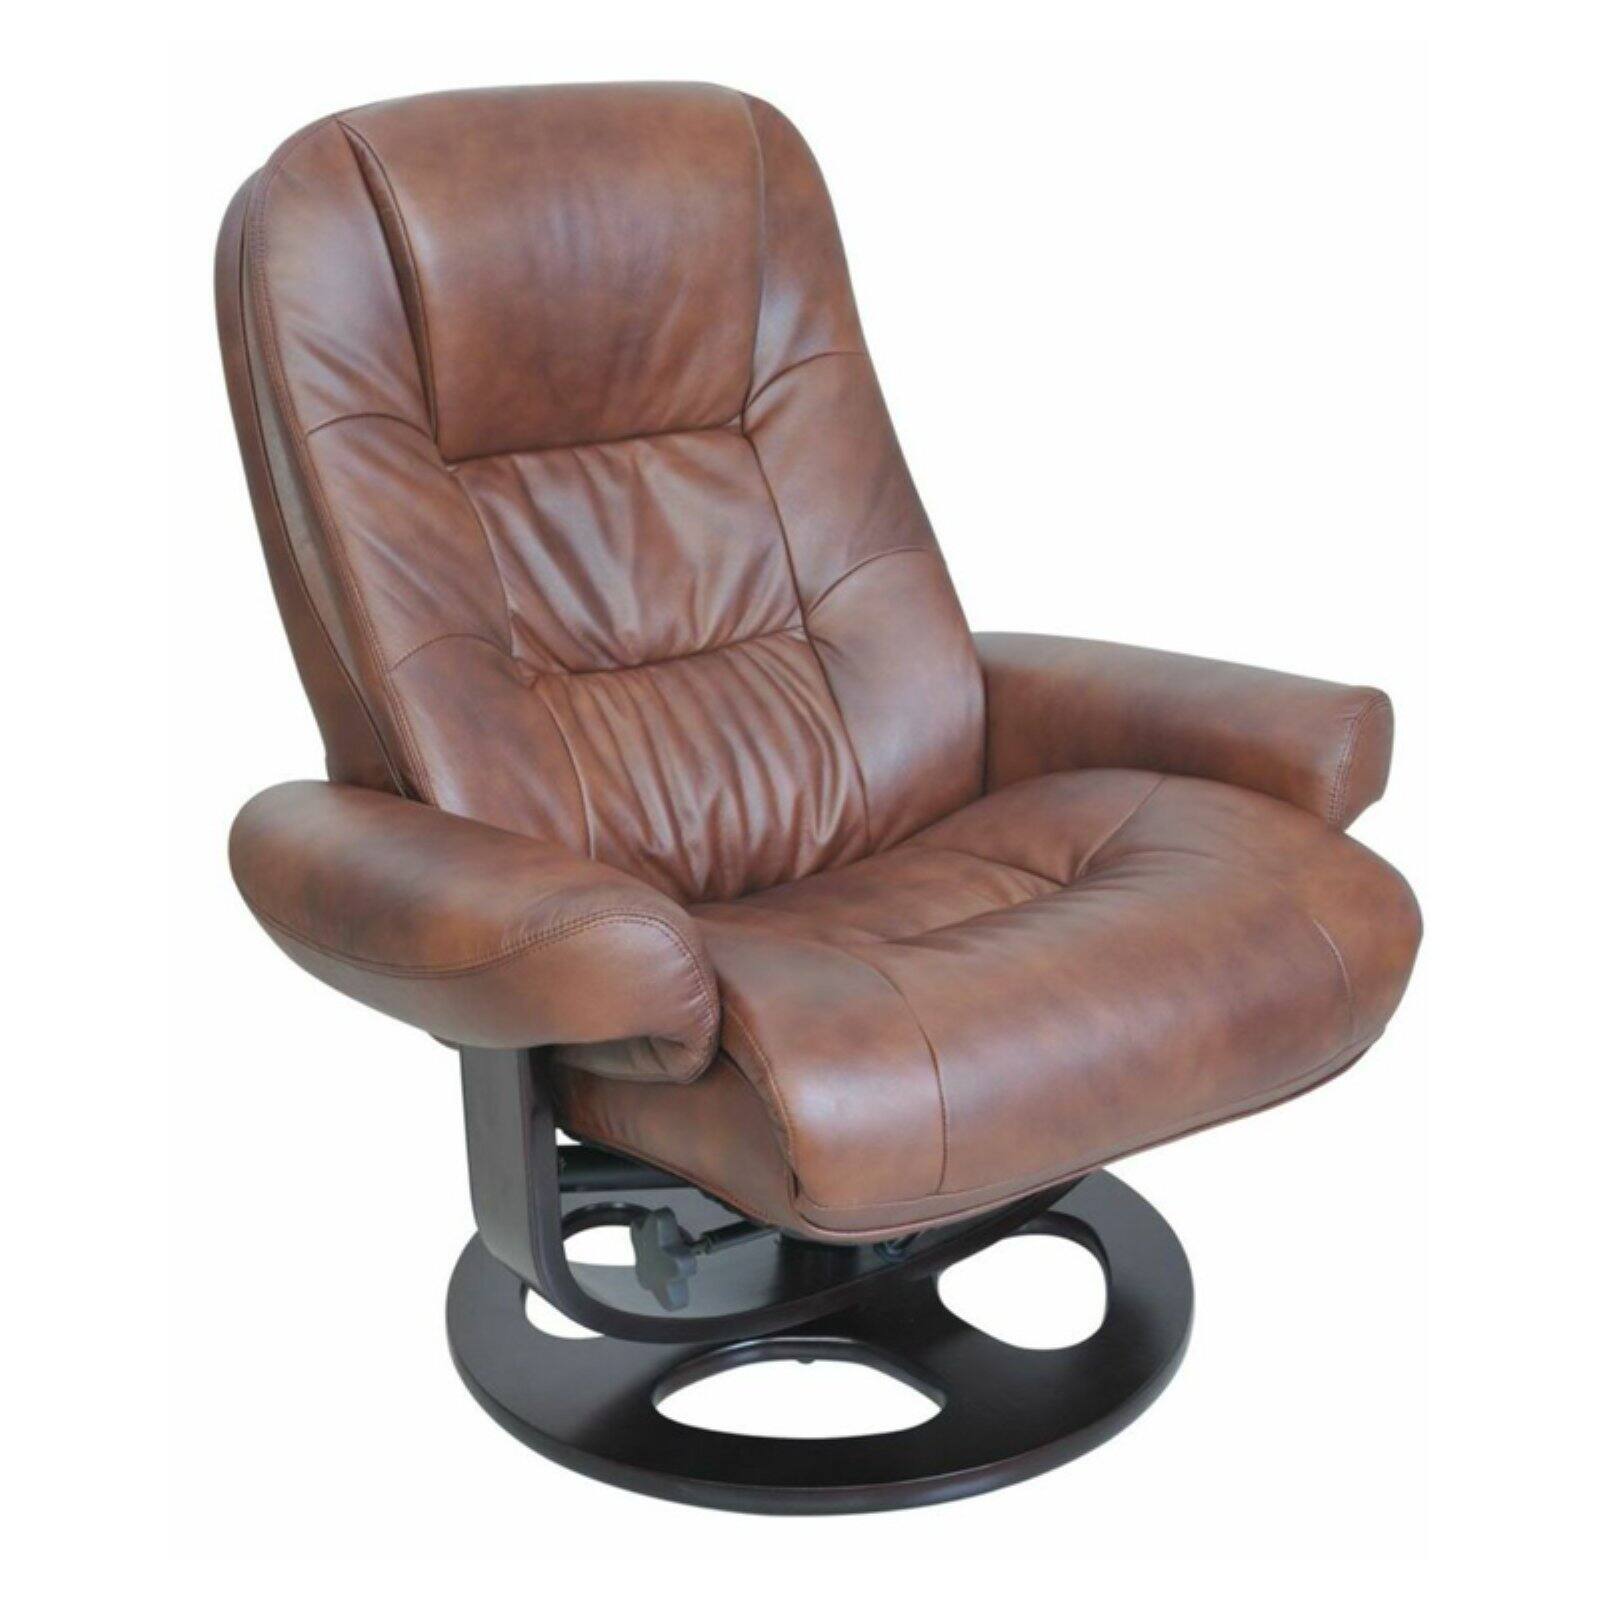 Barcalounger 15-8021 Jacque Swivel Pedestal Recliner w/Ottoman, Whiskey - image 1 of 9